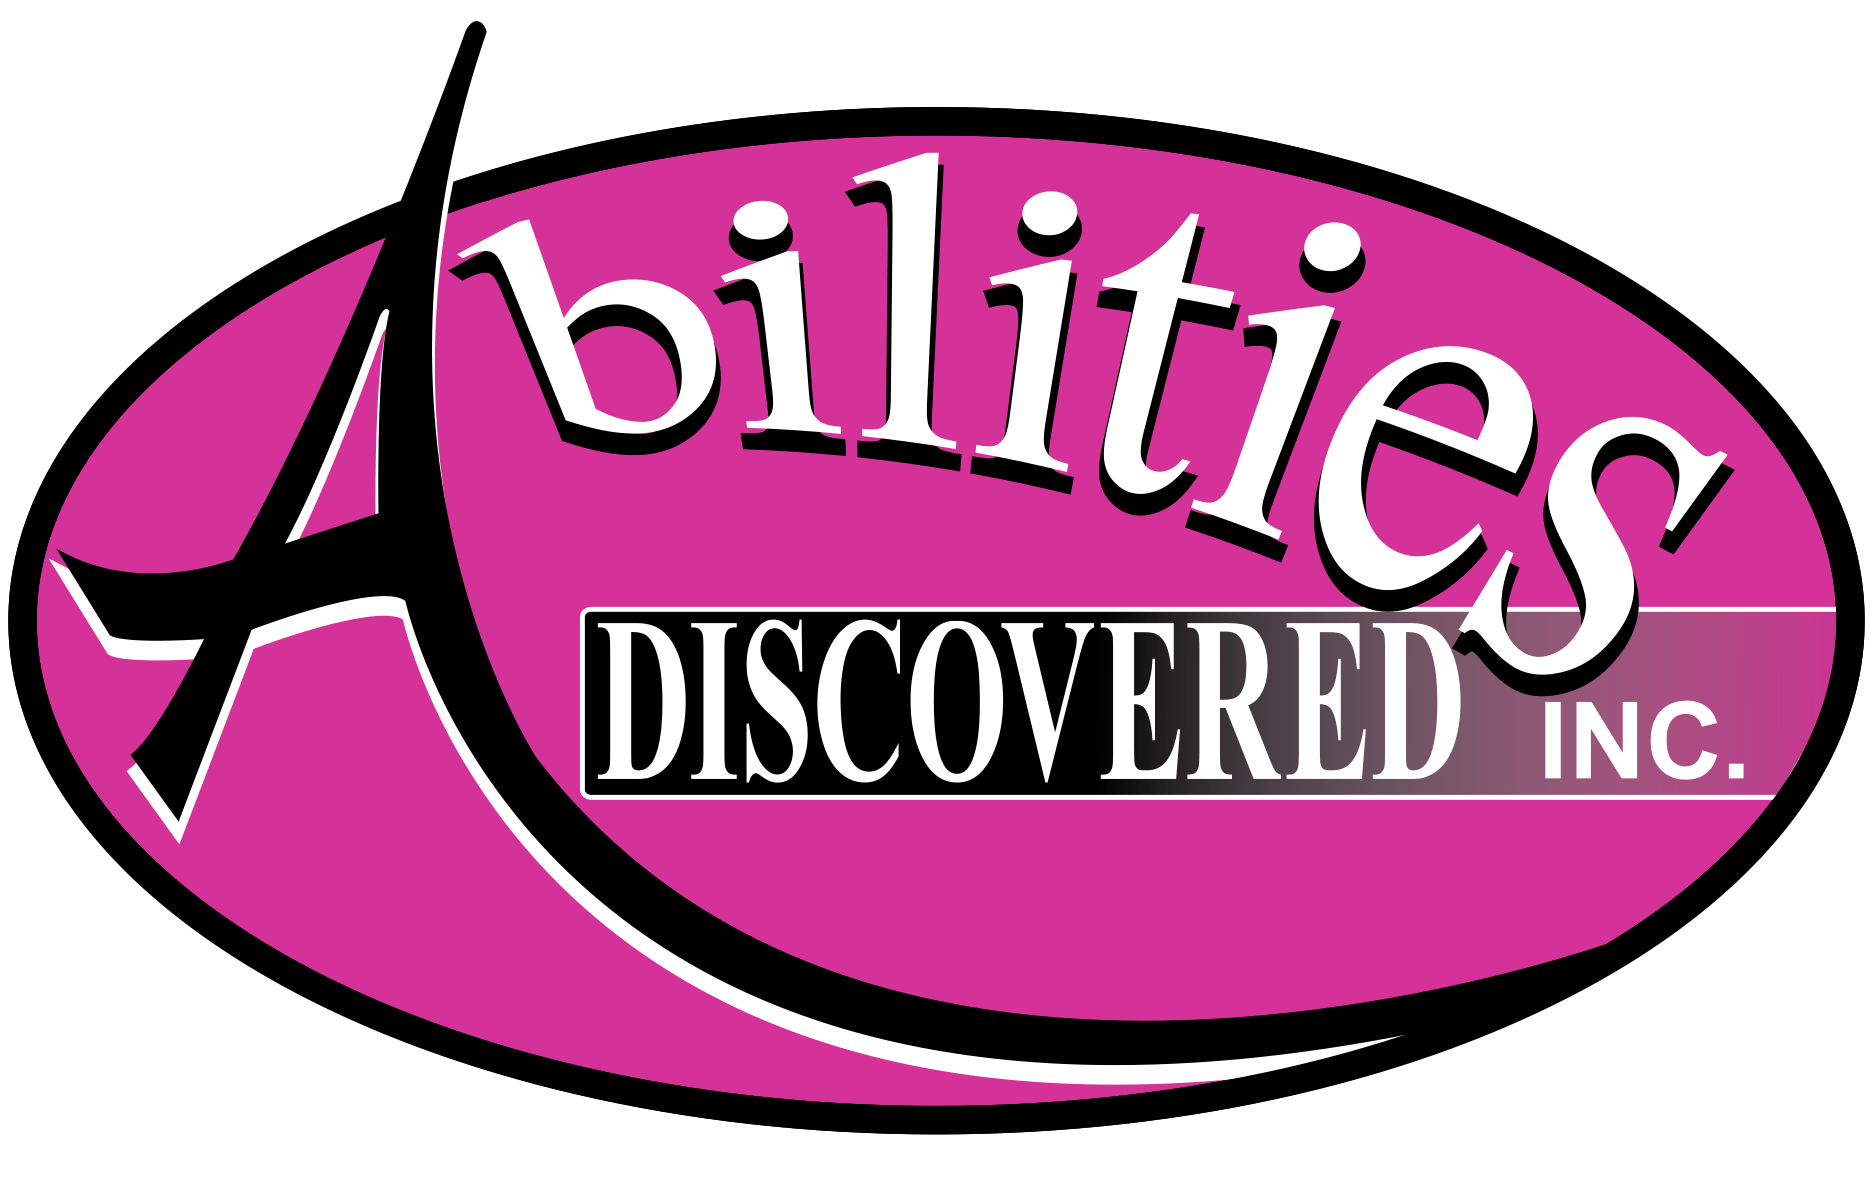 Abilities Discovered logo